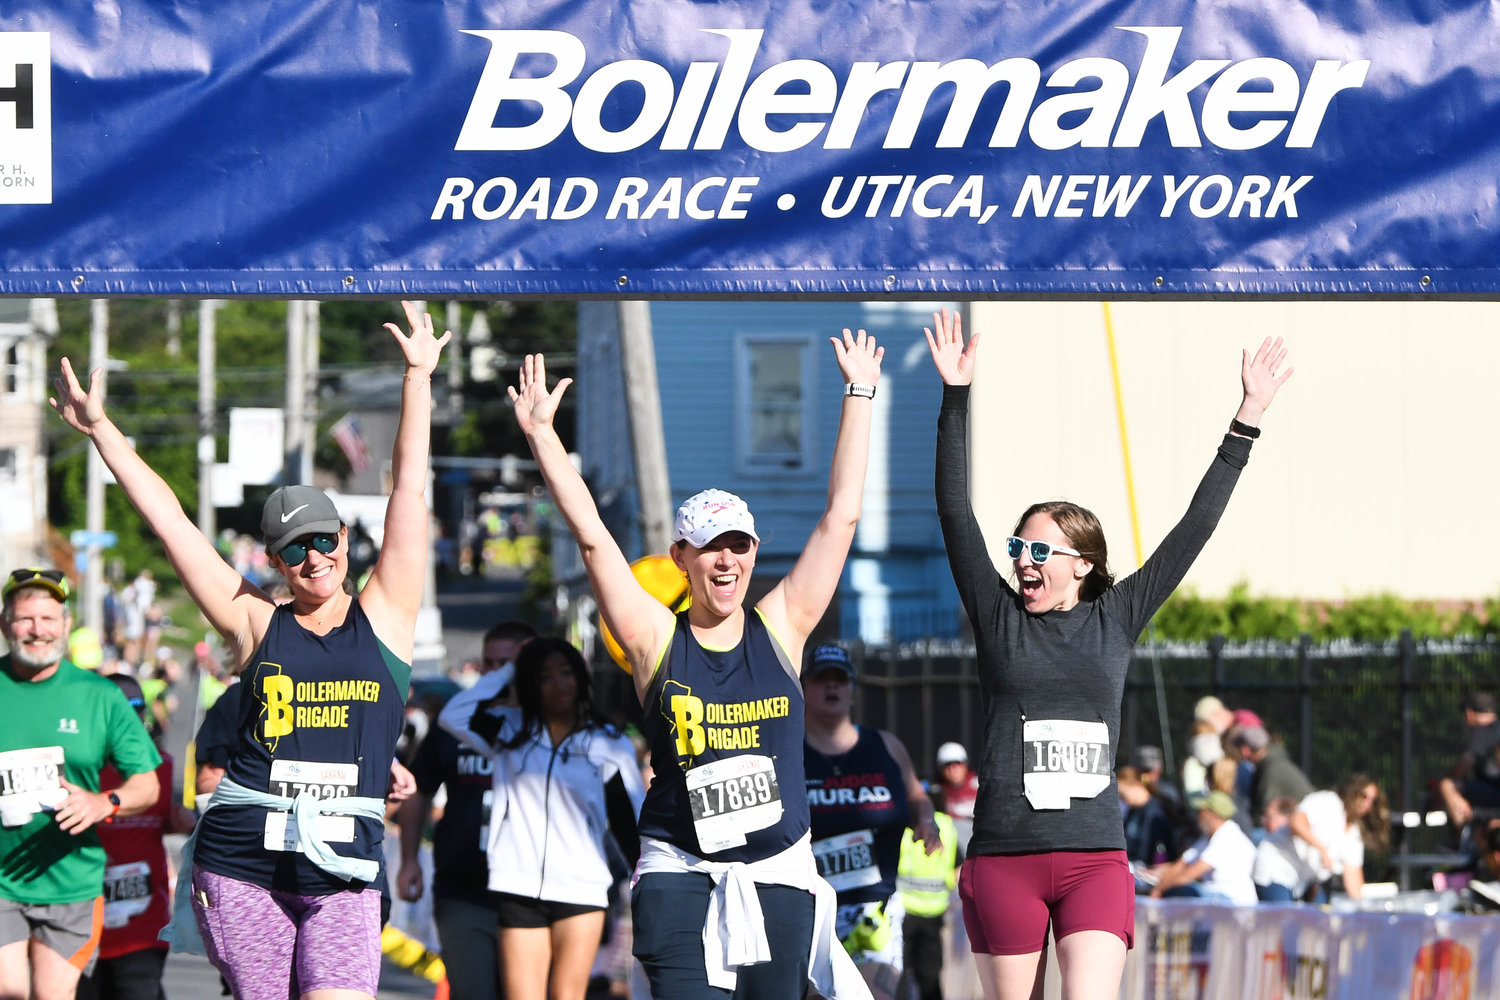 5K runners cross the finish line during the 45th Boilermaker Road Race on Sunday.